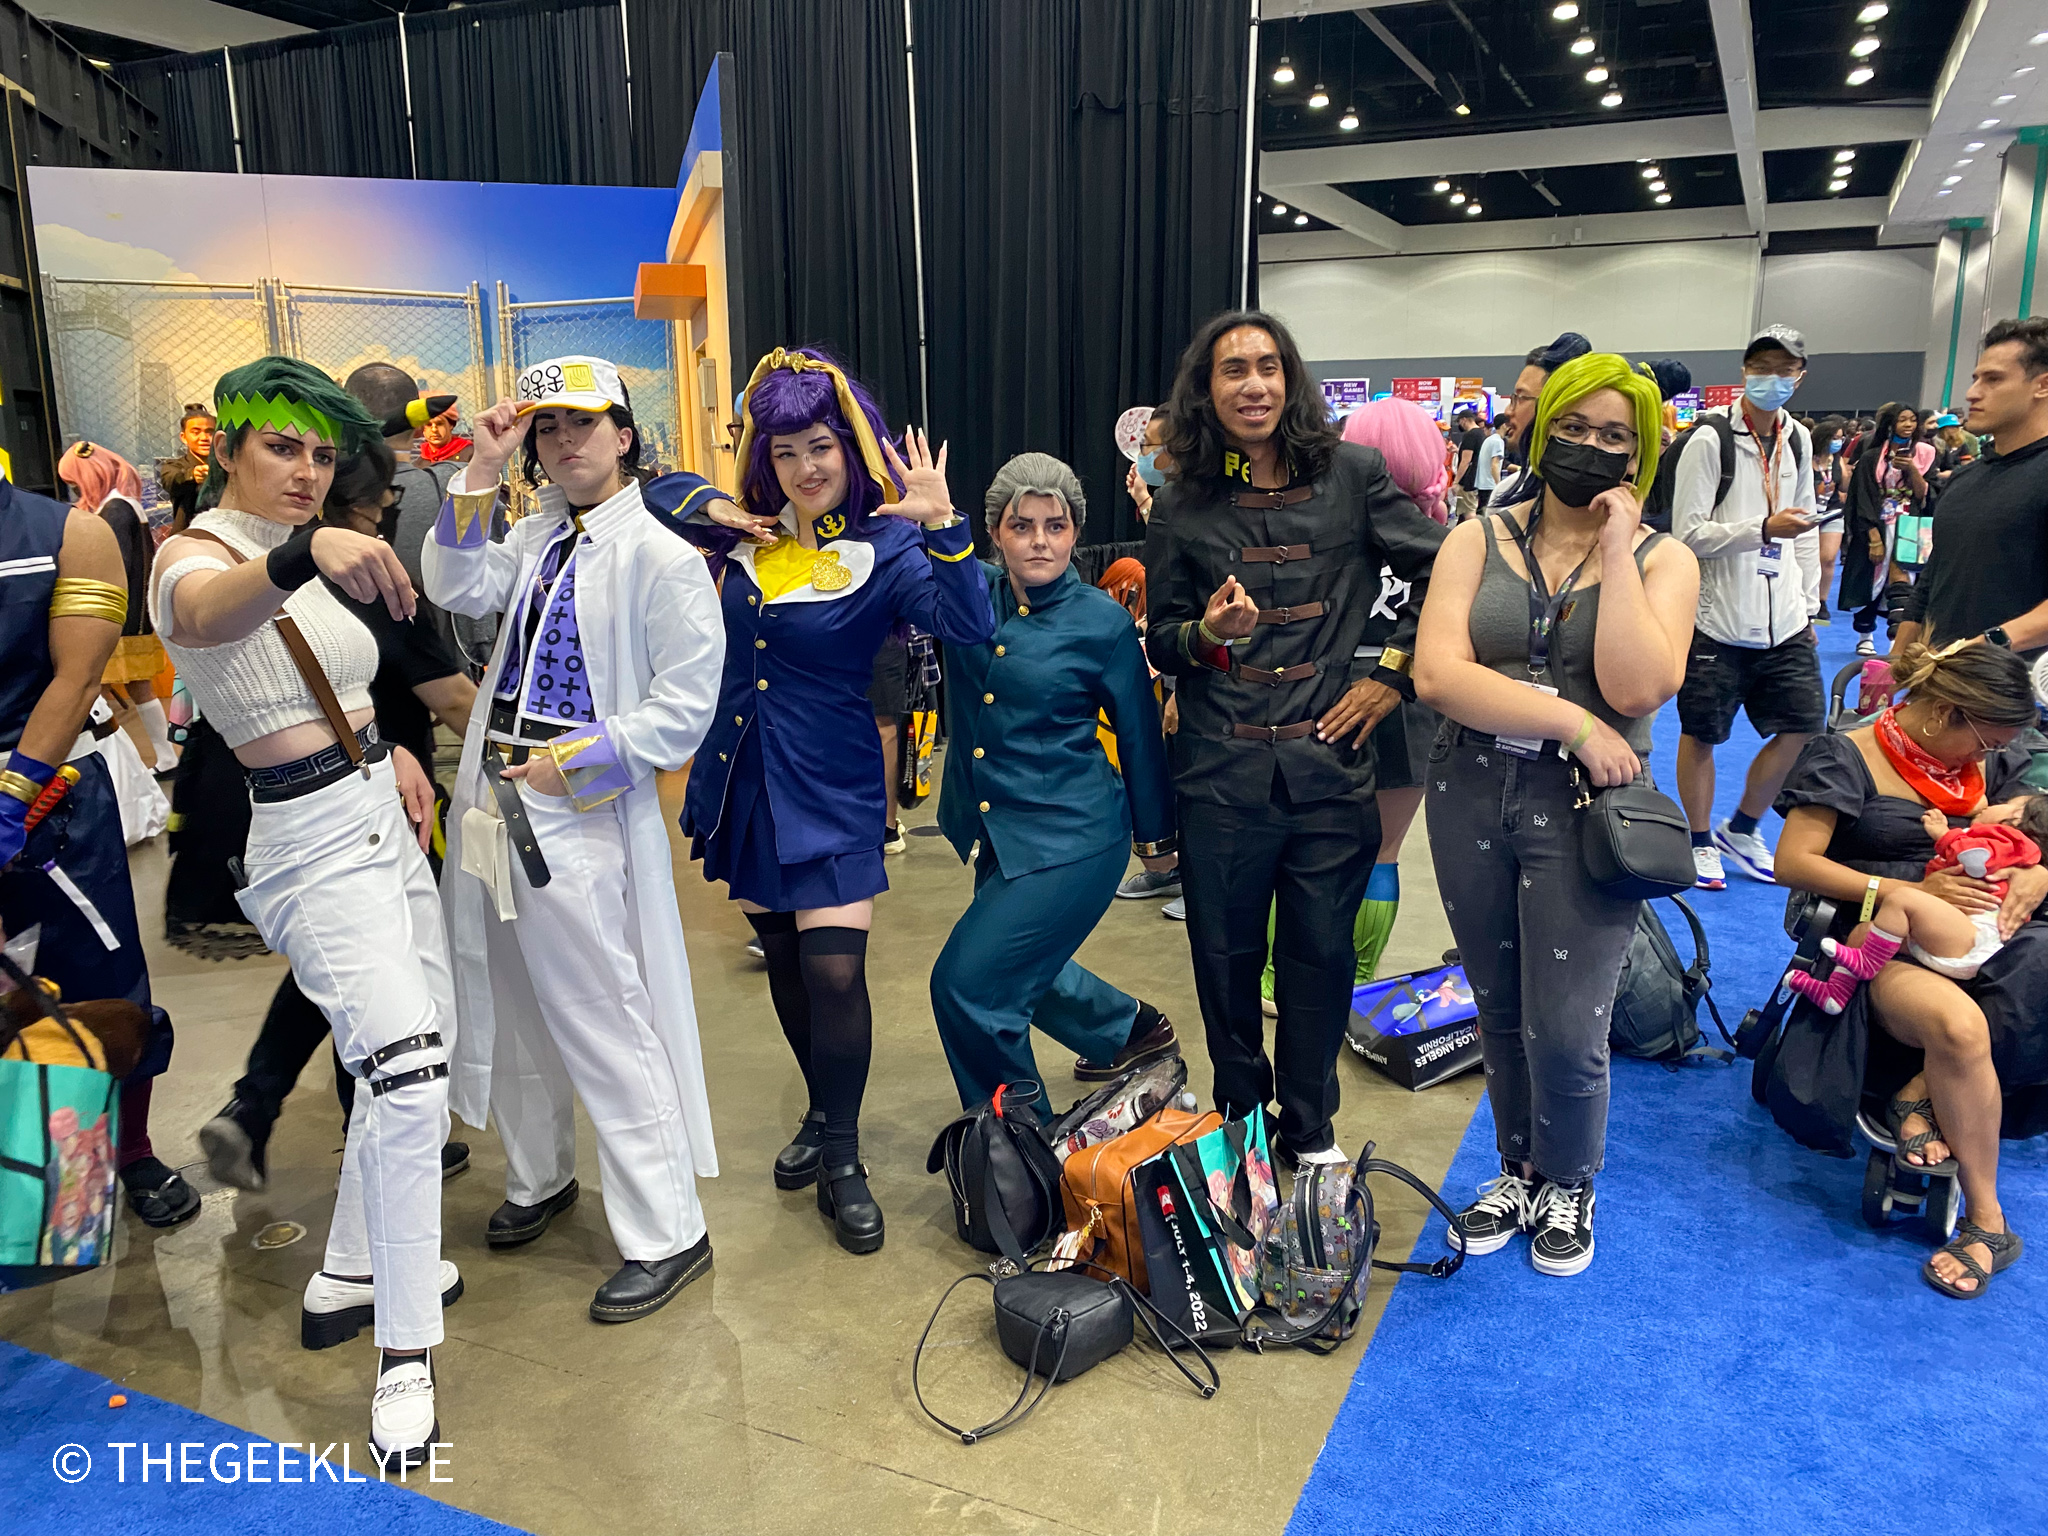 Check out the My Hero Academia Cosplay Meetup at Anime Expo 2019